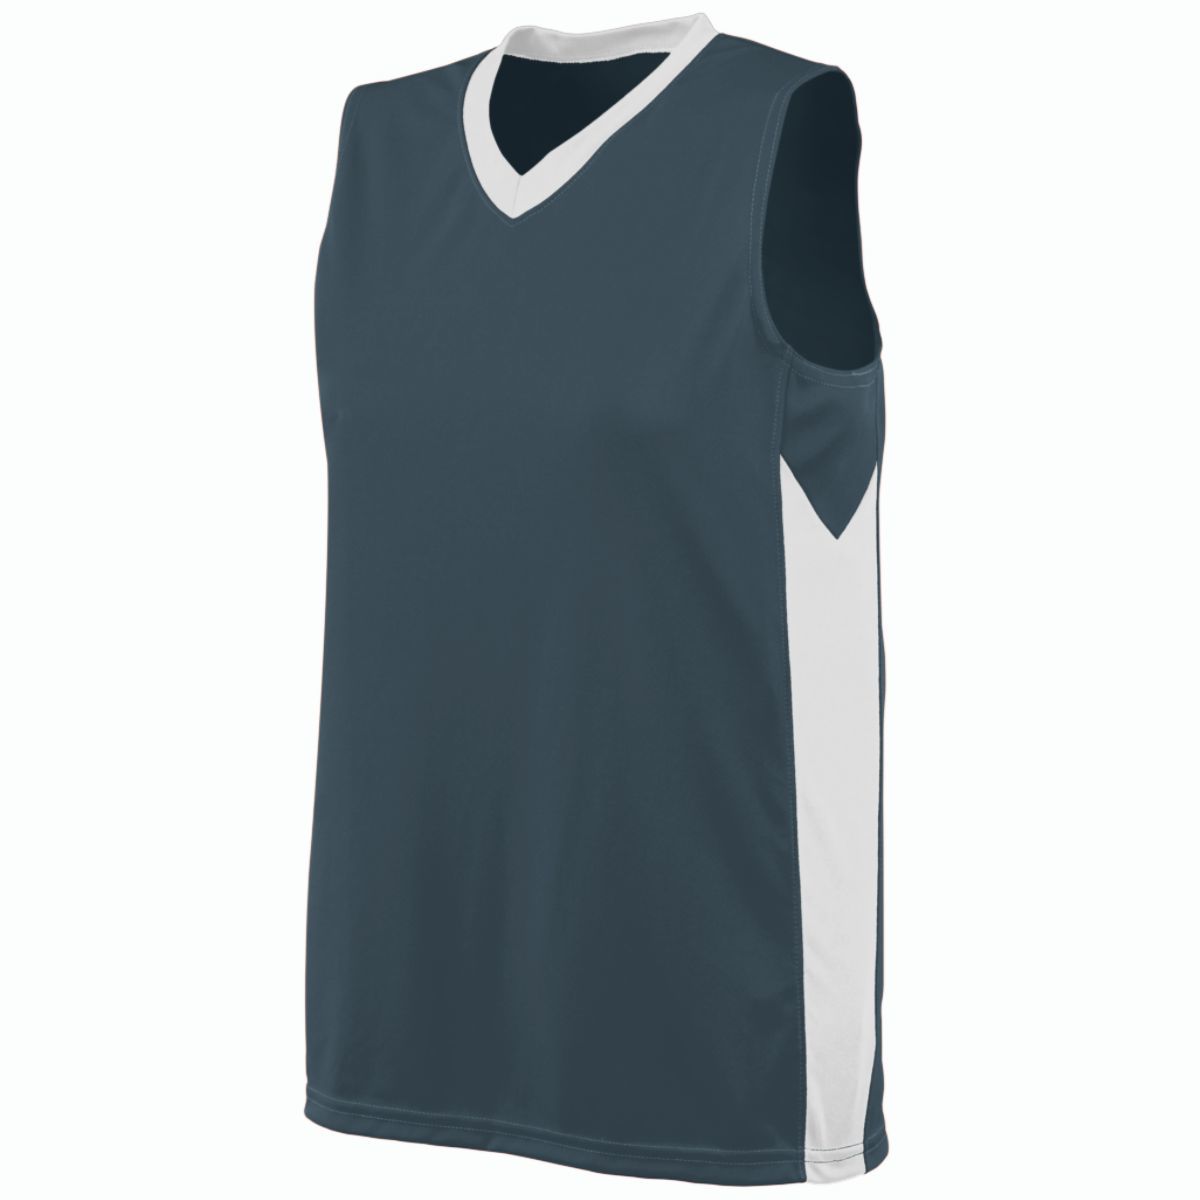 Augusta Sportswear Ladies Block Out Jersey in Slate/White  -Part of the Ladies, Ladies-Jersey, Augusta-Products, Basketball, Shirts, All-Sports, All-Sports-1 product lines at KanaleyCreations.com